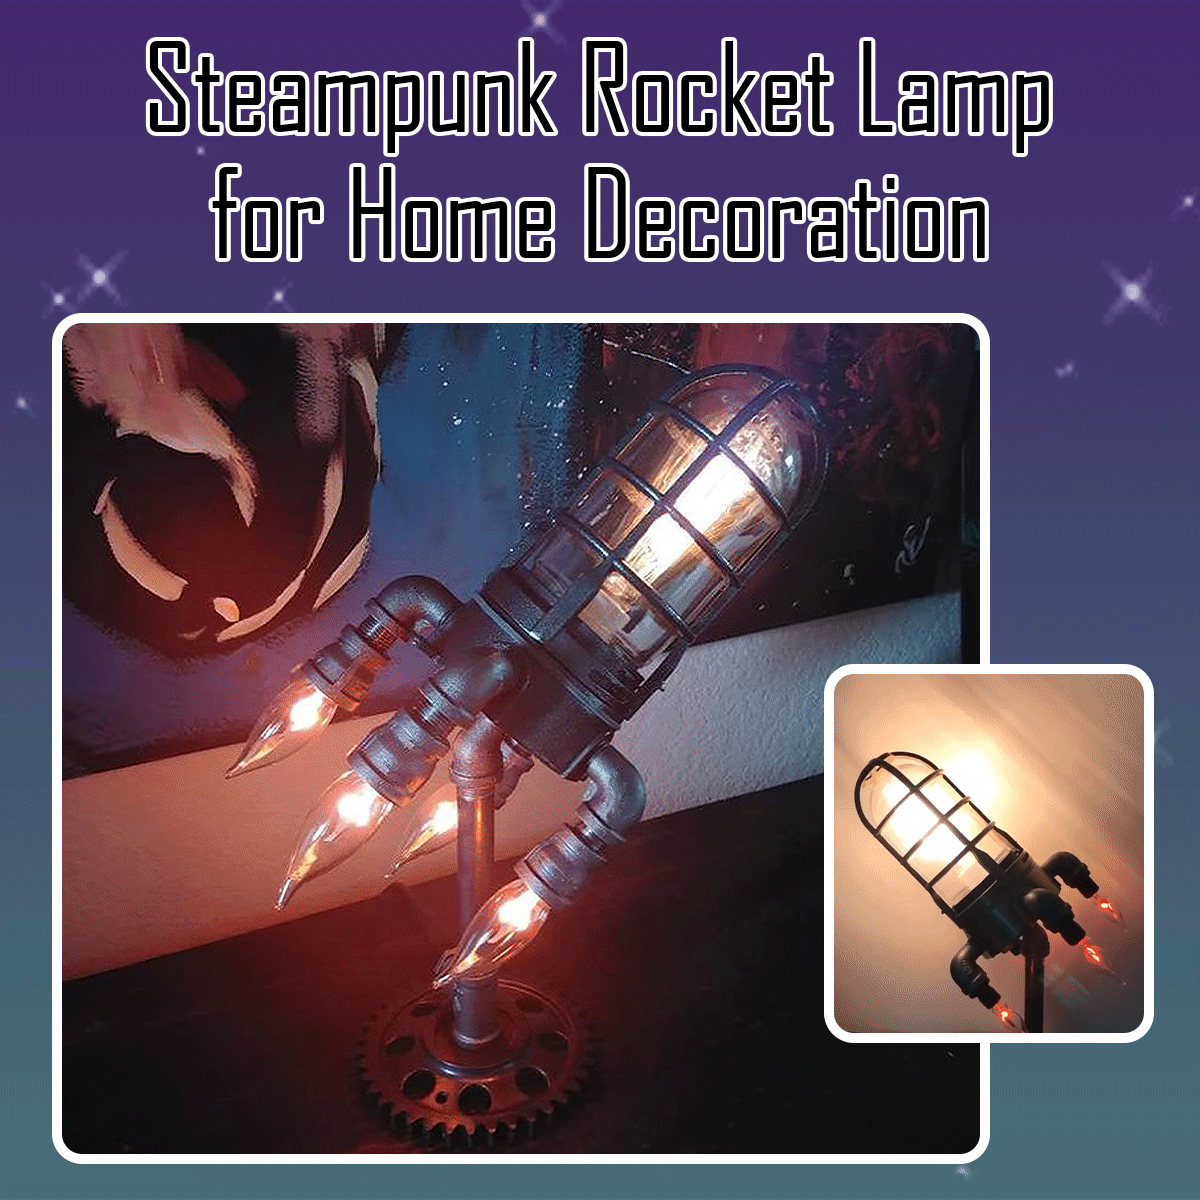 Steampunk Rocket Lamp for Home Decoration